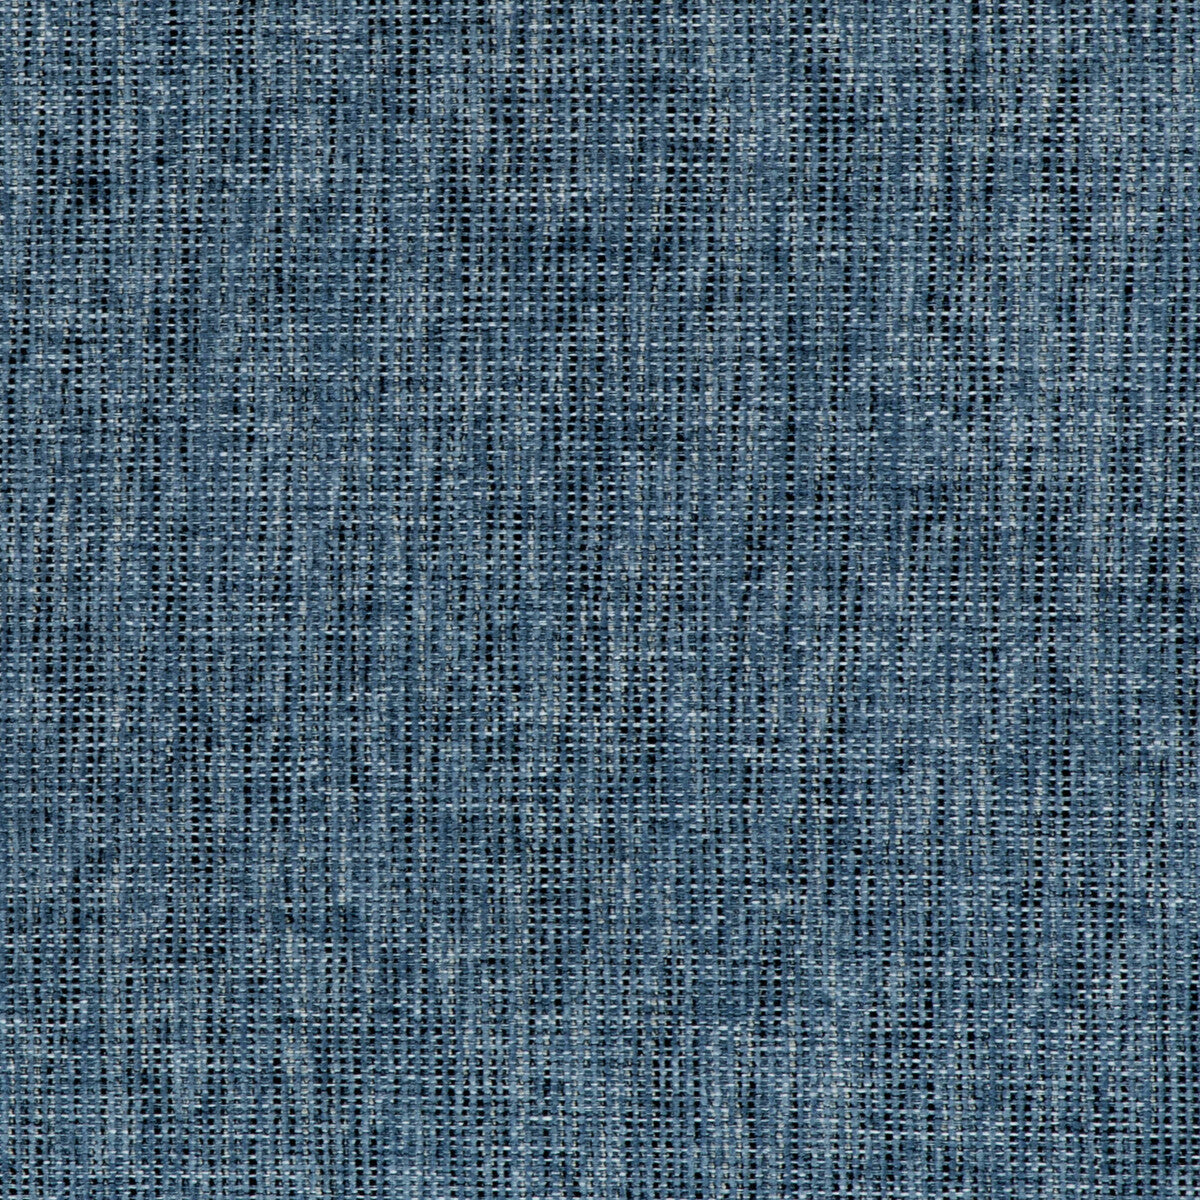 Standford fabric in indigo color - pattern 33406.5.0 - by Kravet Basics